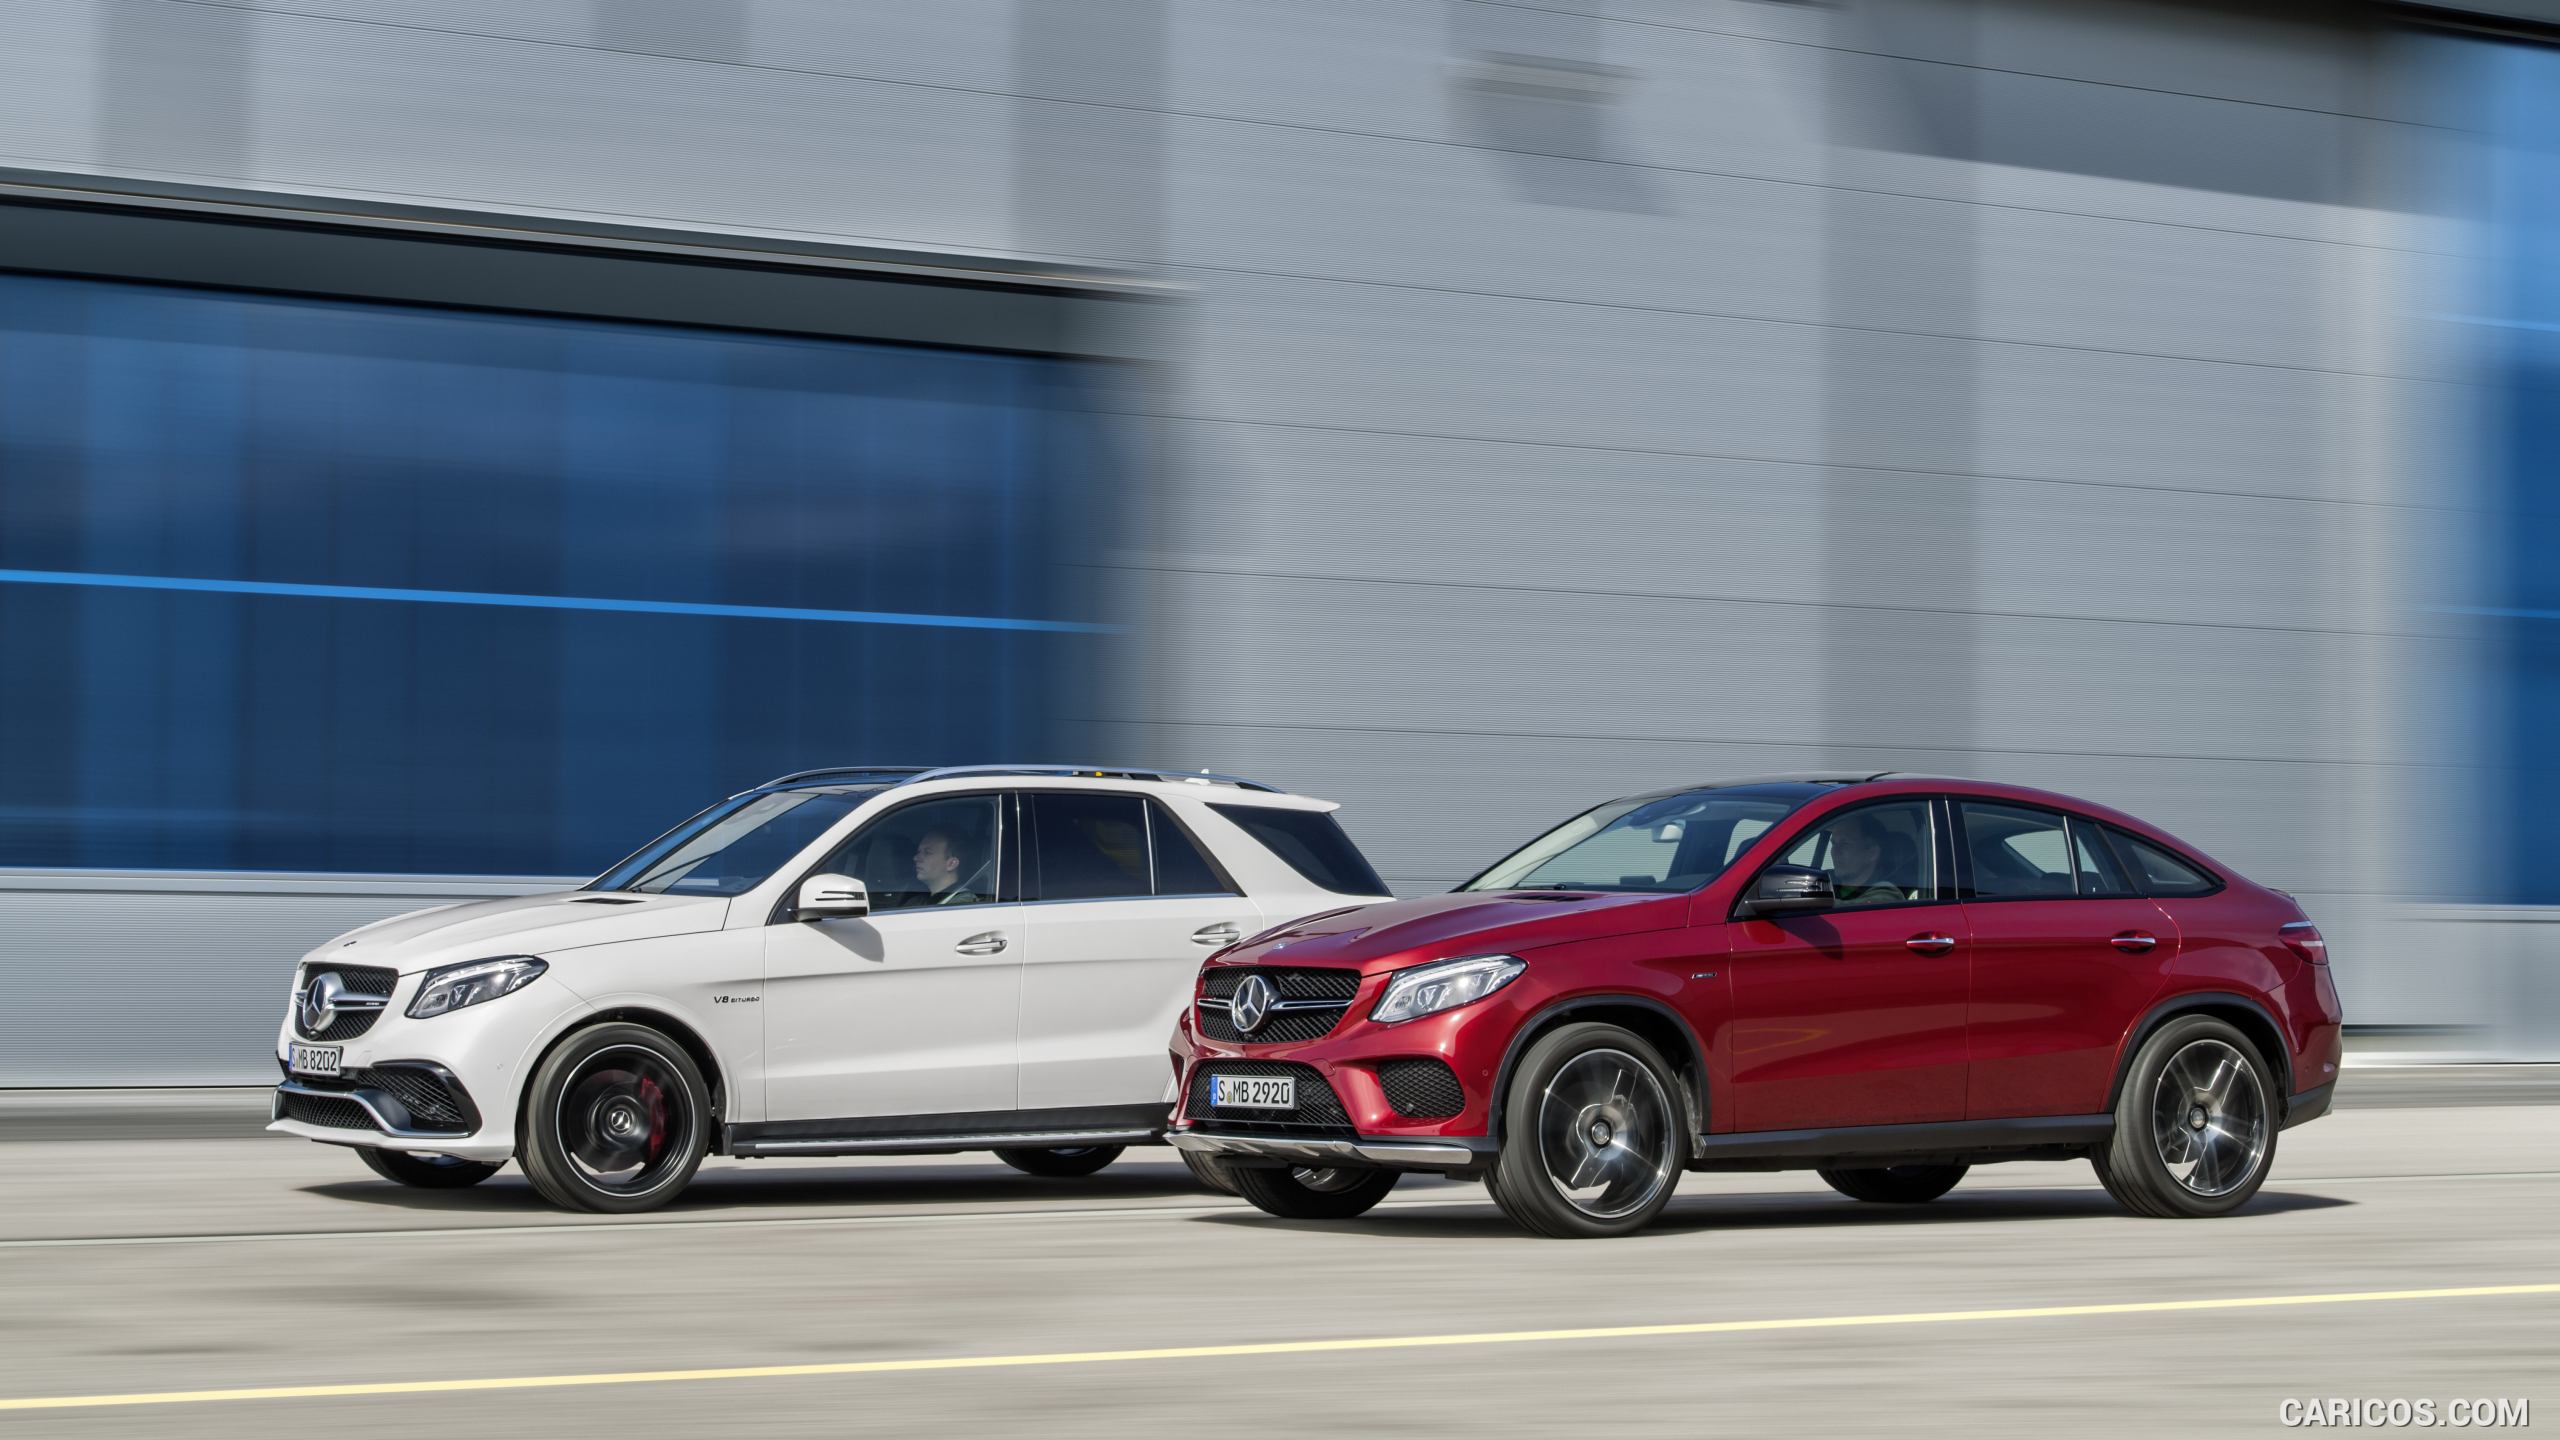 2016 Mercedes-Benz GLE 450 AMG Coupe 4MATIC (Designo Hyacinth Red Metallic) and Mercedes-AMG GLE 63 S - Side, #29 of 115